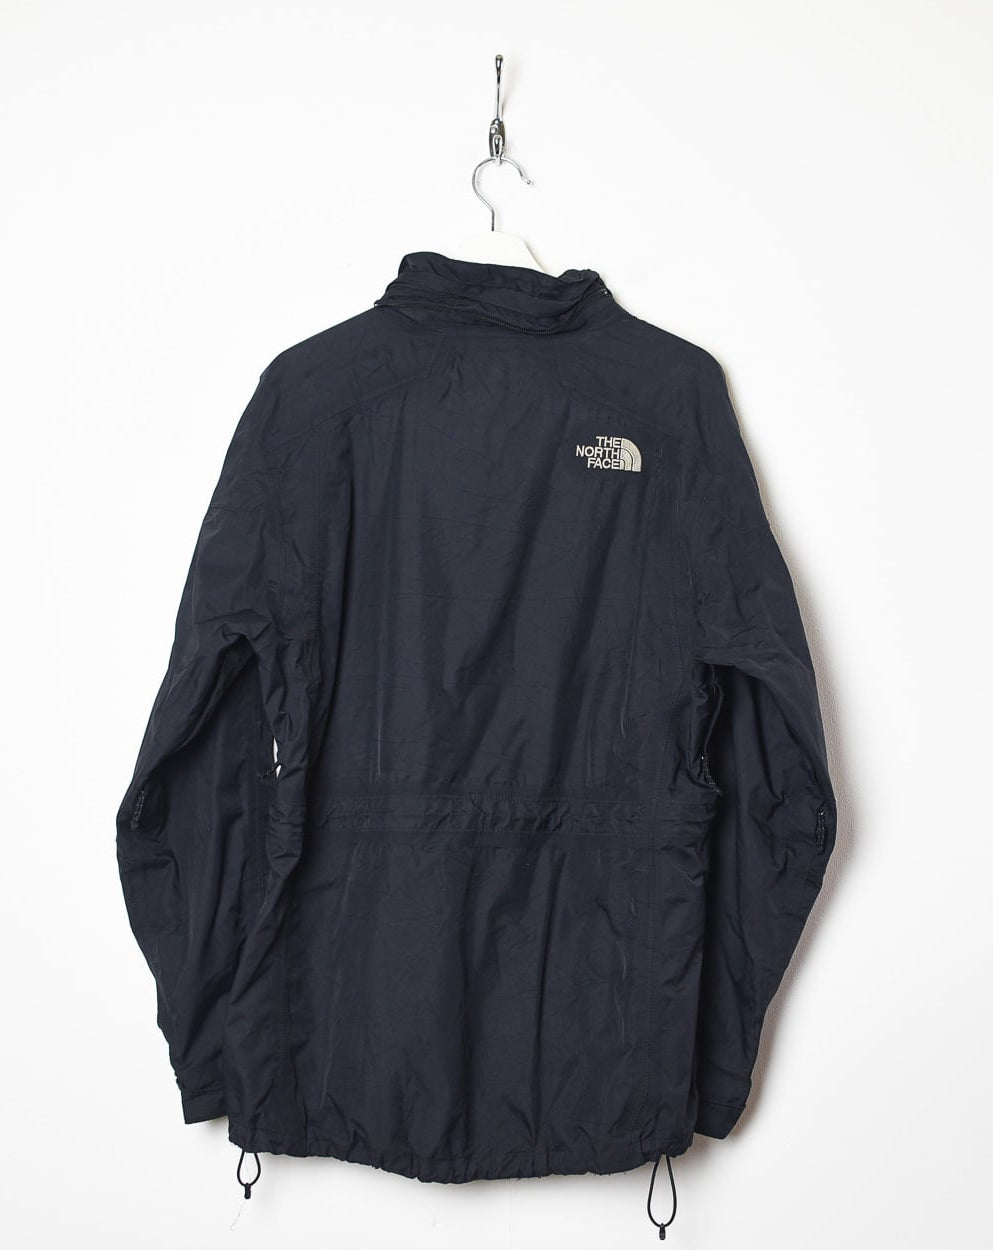 Black The North Face Hyvent Jacket - X-Large Women's